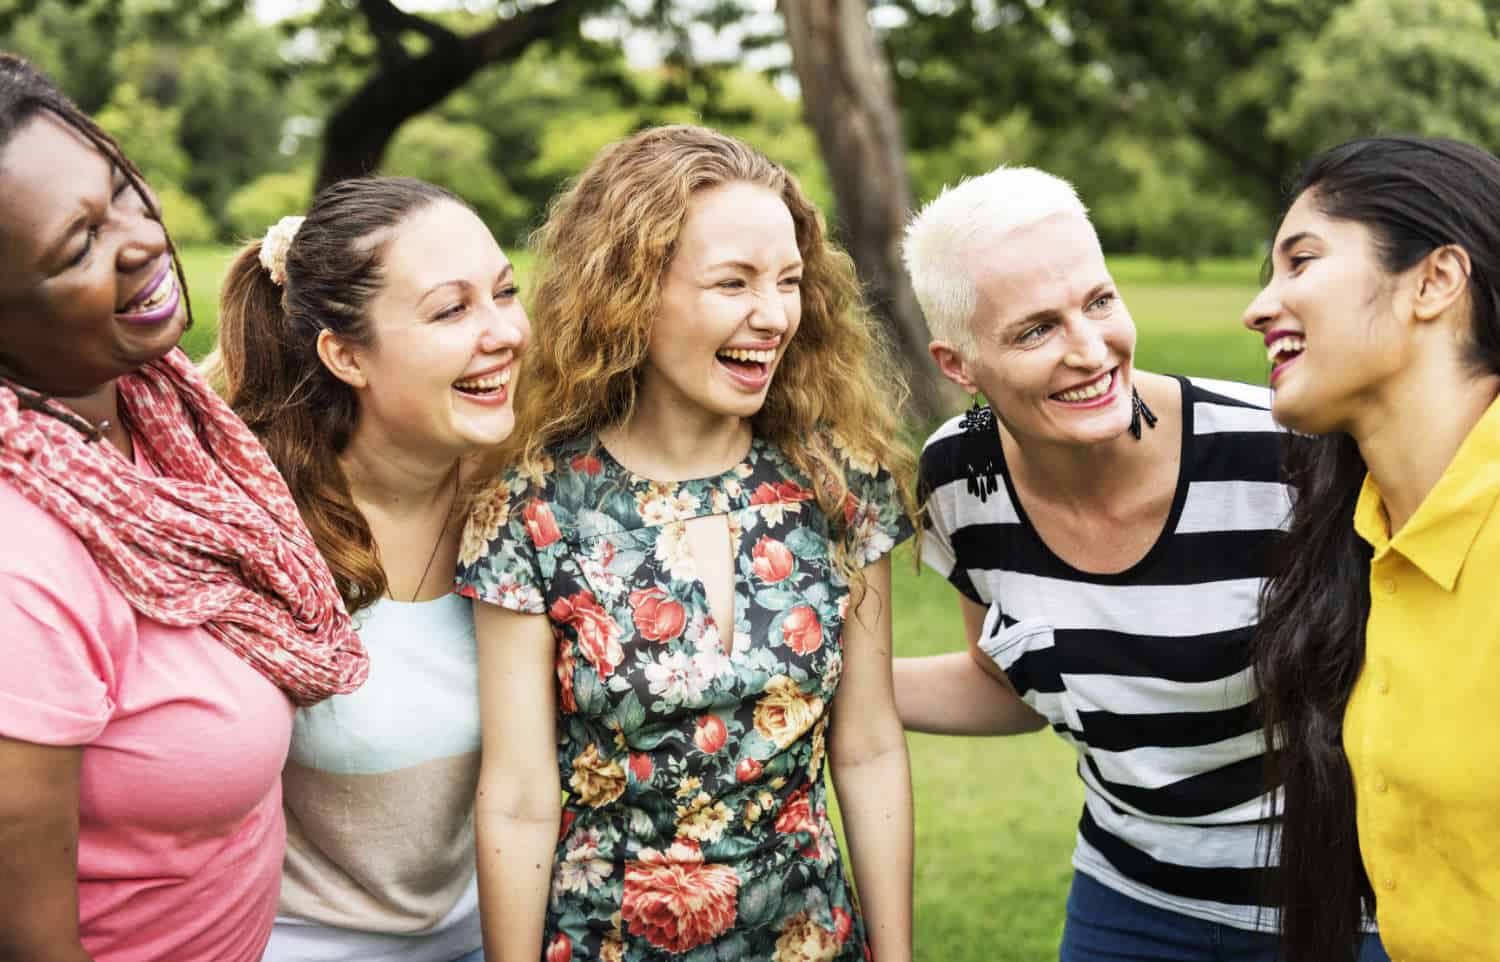 Photo of a group of women smiling and having fun